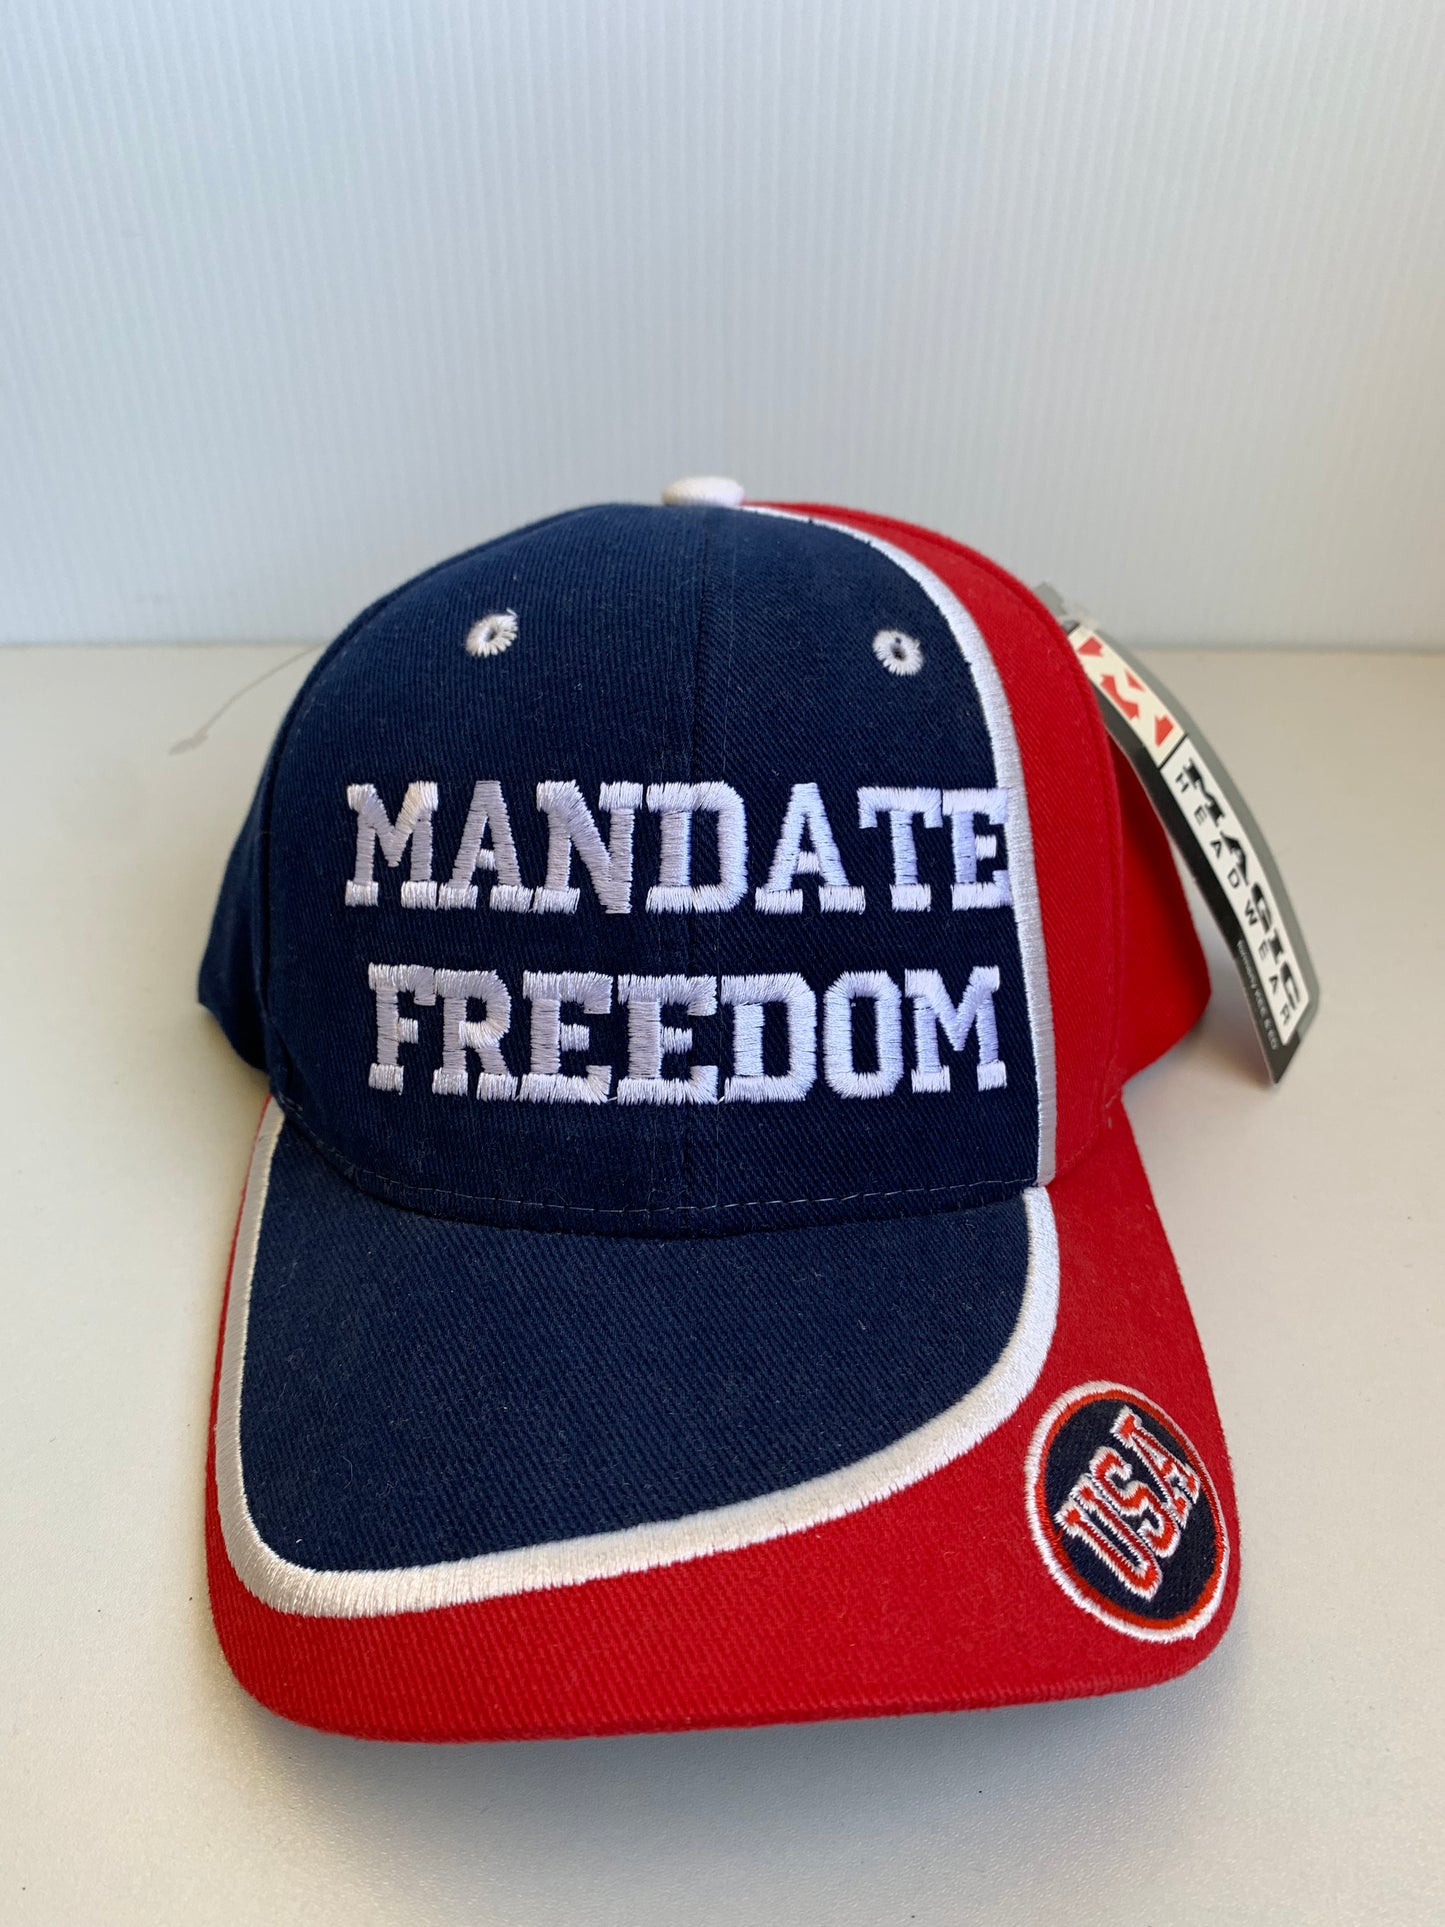 Mandate Freedom Embroidered USA Ball Cap Hat